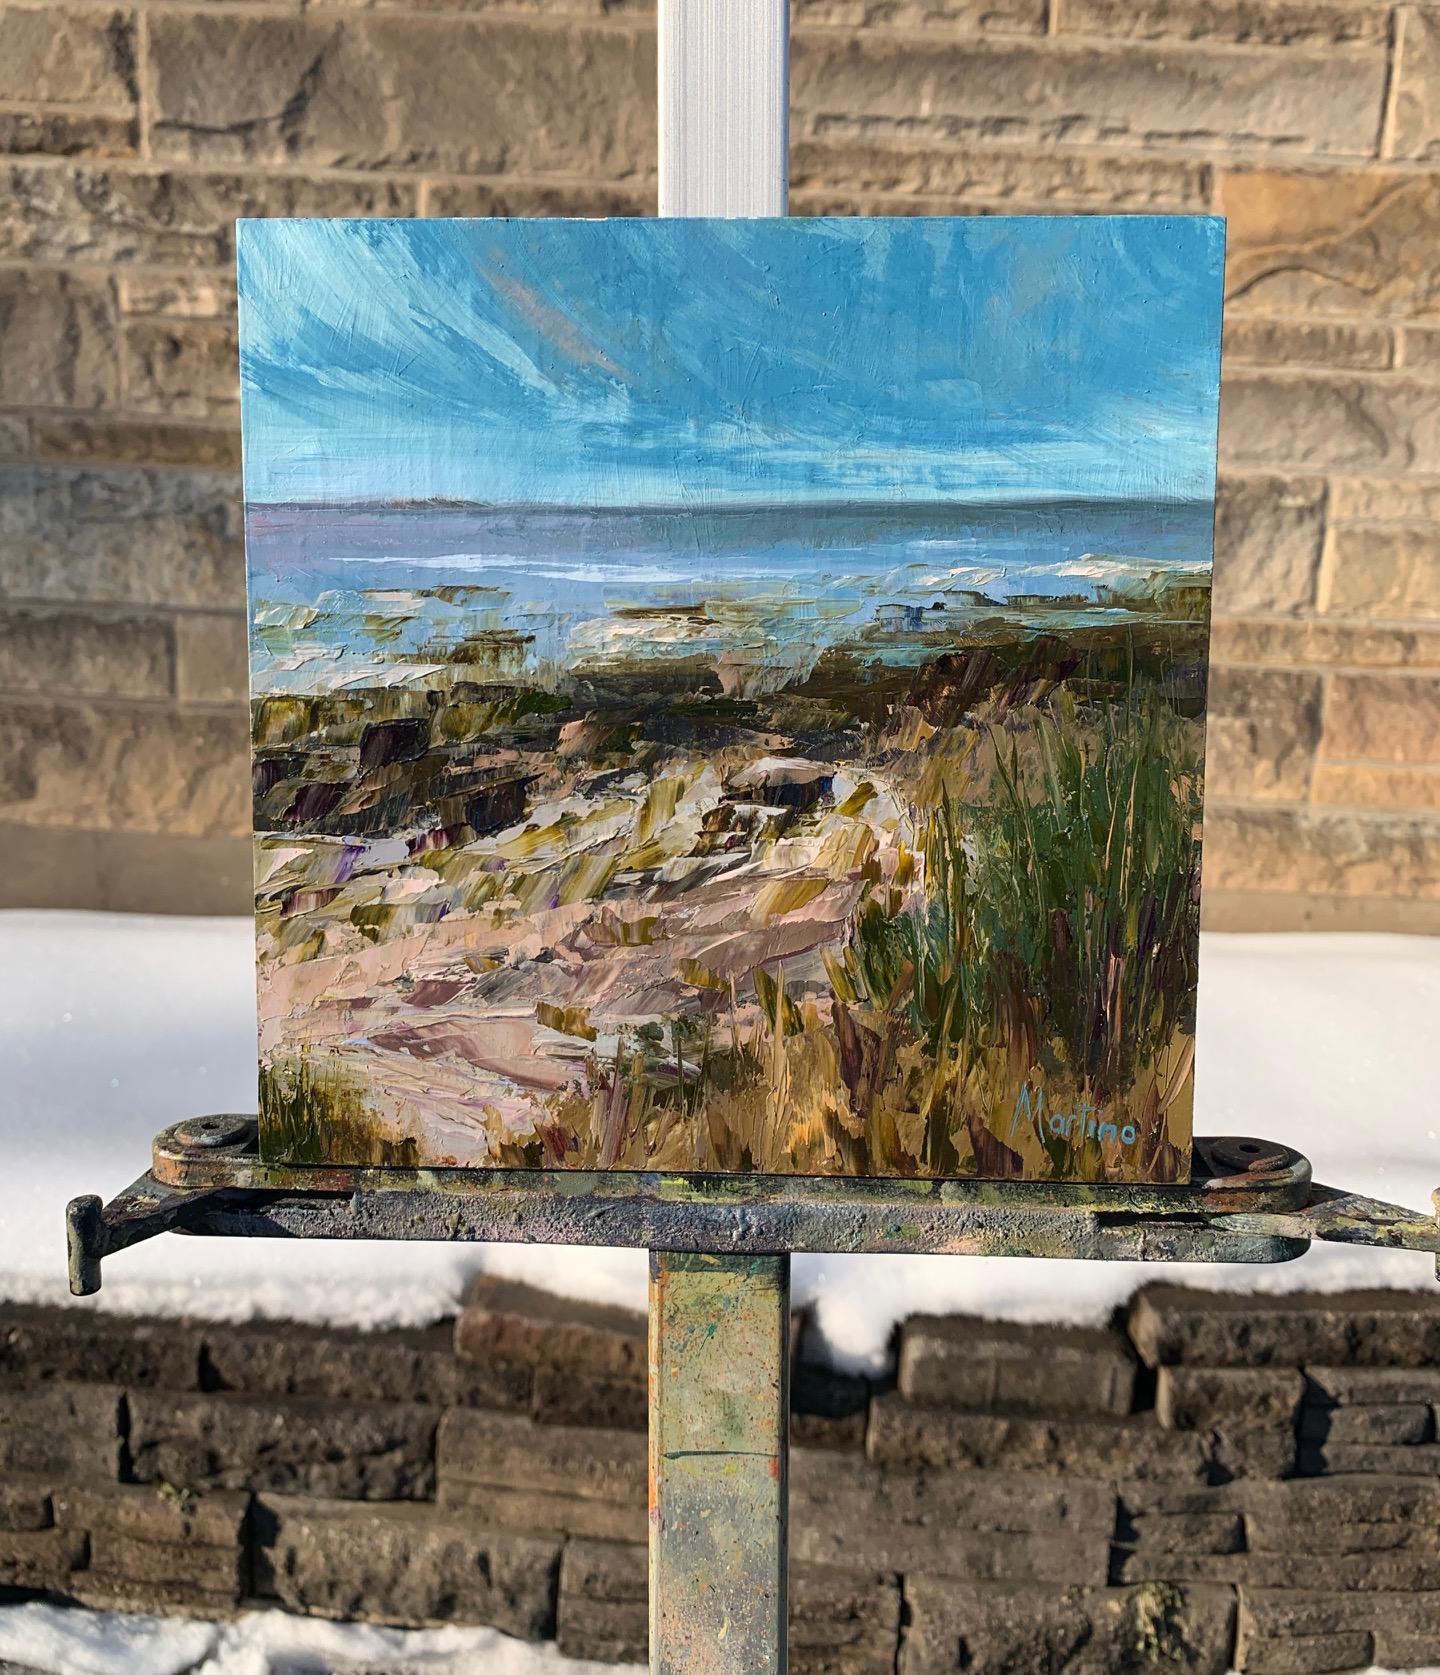 <p>Artist Comments<br>Part of artist Paula Martino's Maine series. This piece was inspired by a hike around Peak's Island, Maine, on a bright summer day in the month of June in 2020. With the use of her palette knife, Paula renders thick impasto